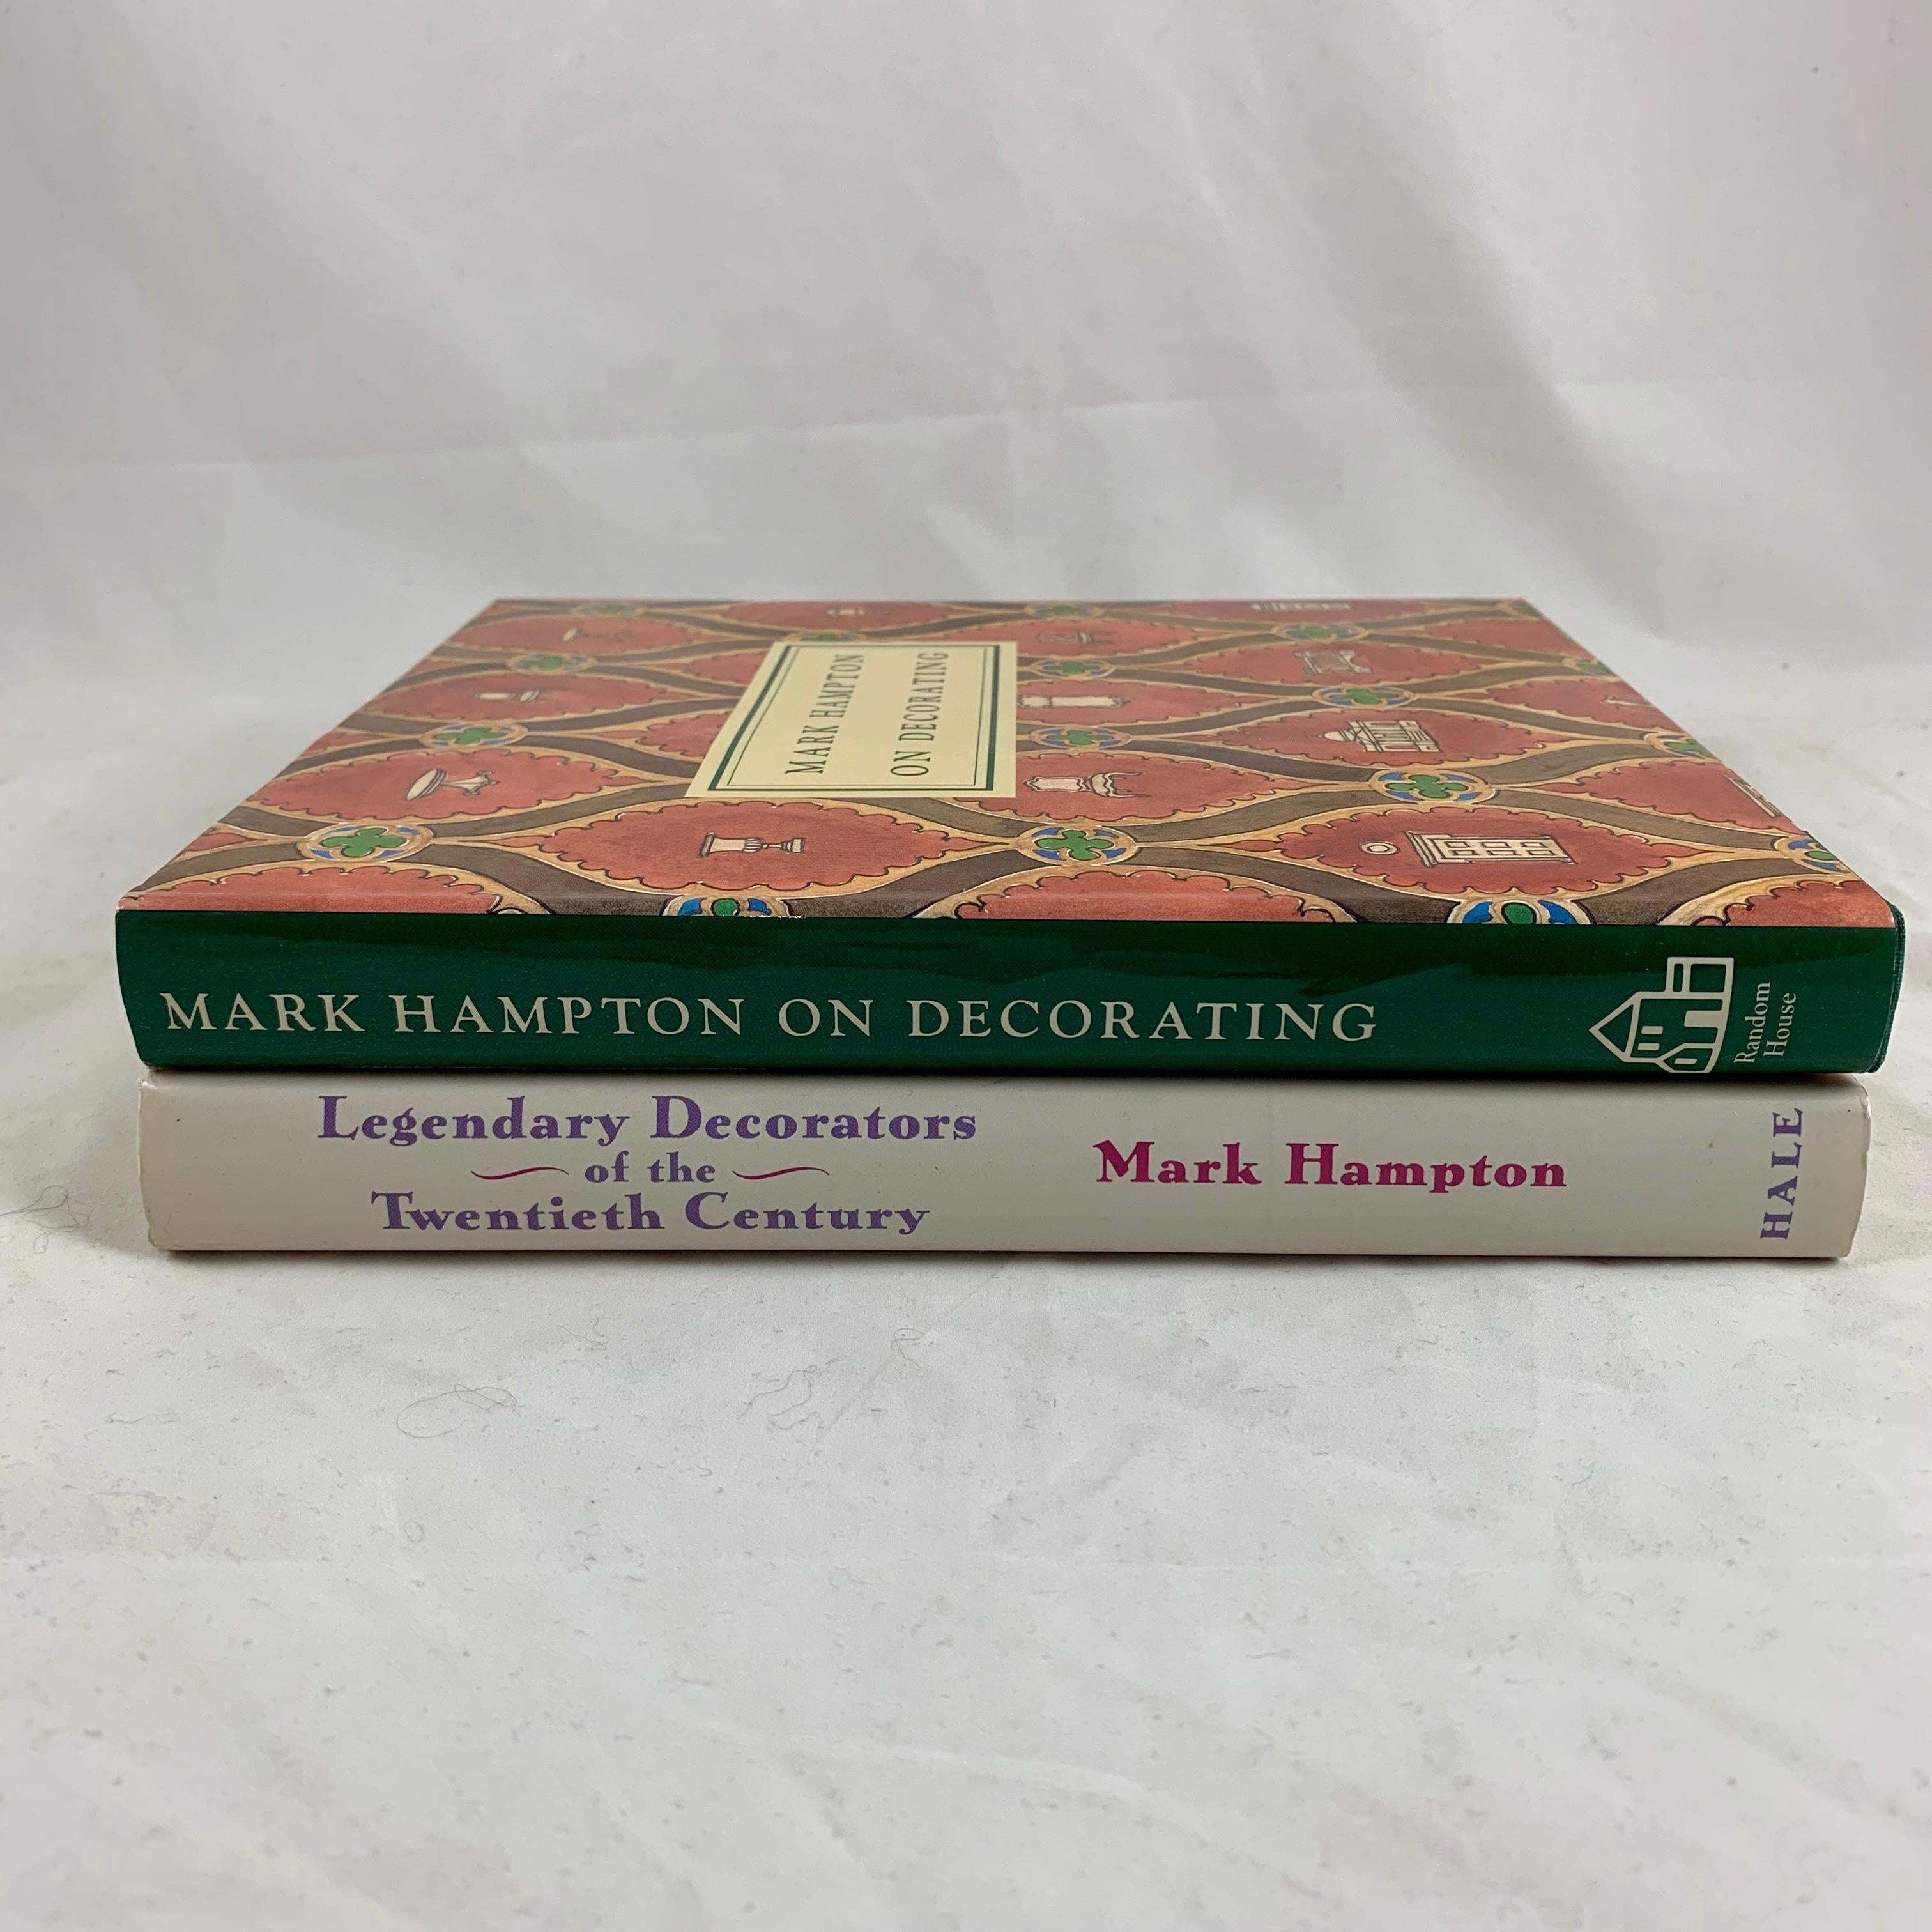 Architectural Digest called Mark Hampton, “one of the wold’s twenty greatest designers of all time,”

‘Mark Hampton on Decorating’ is a collection of essays from his popular House & Garden columns. Hampton shares witty anecdotes and observations